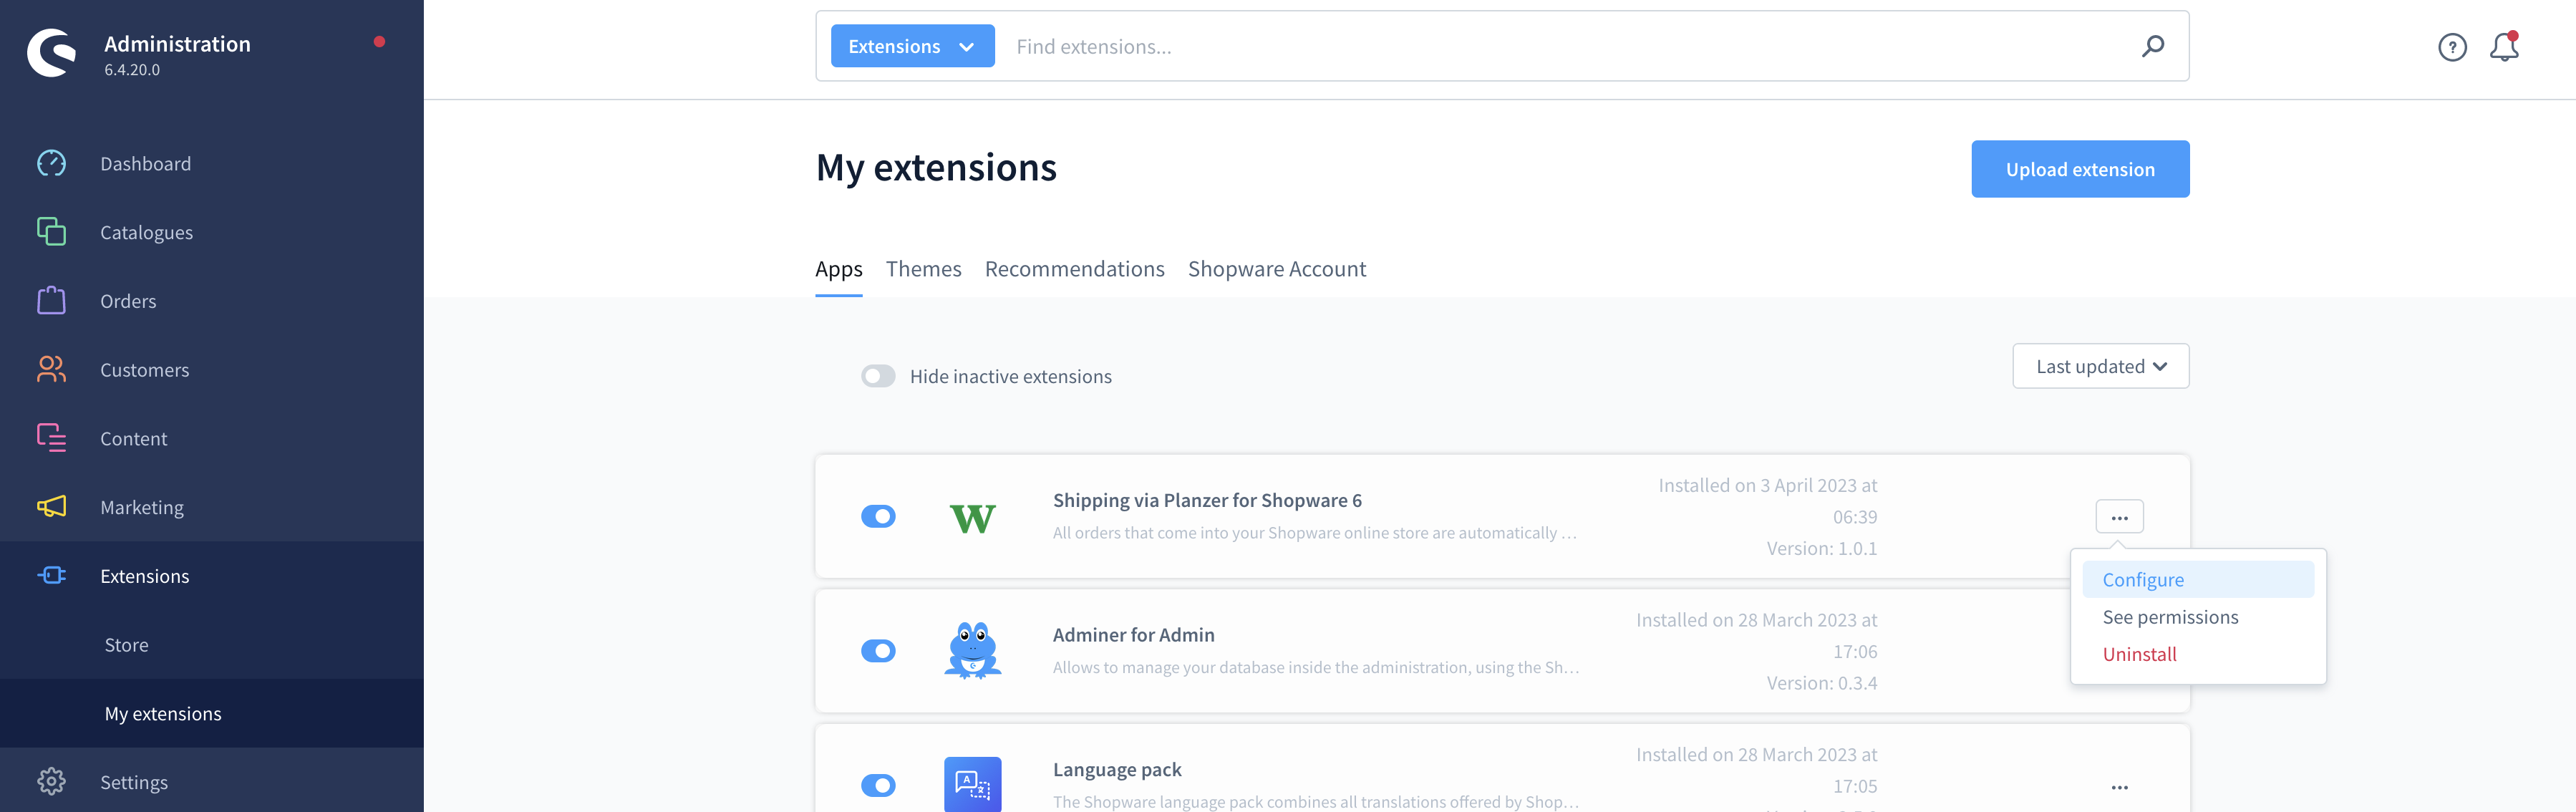 Extension Page